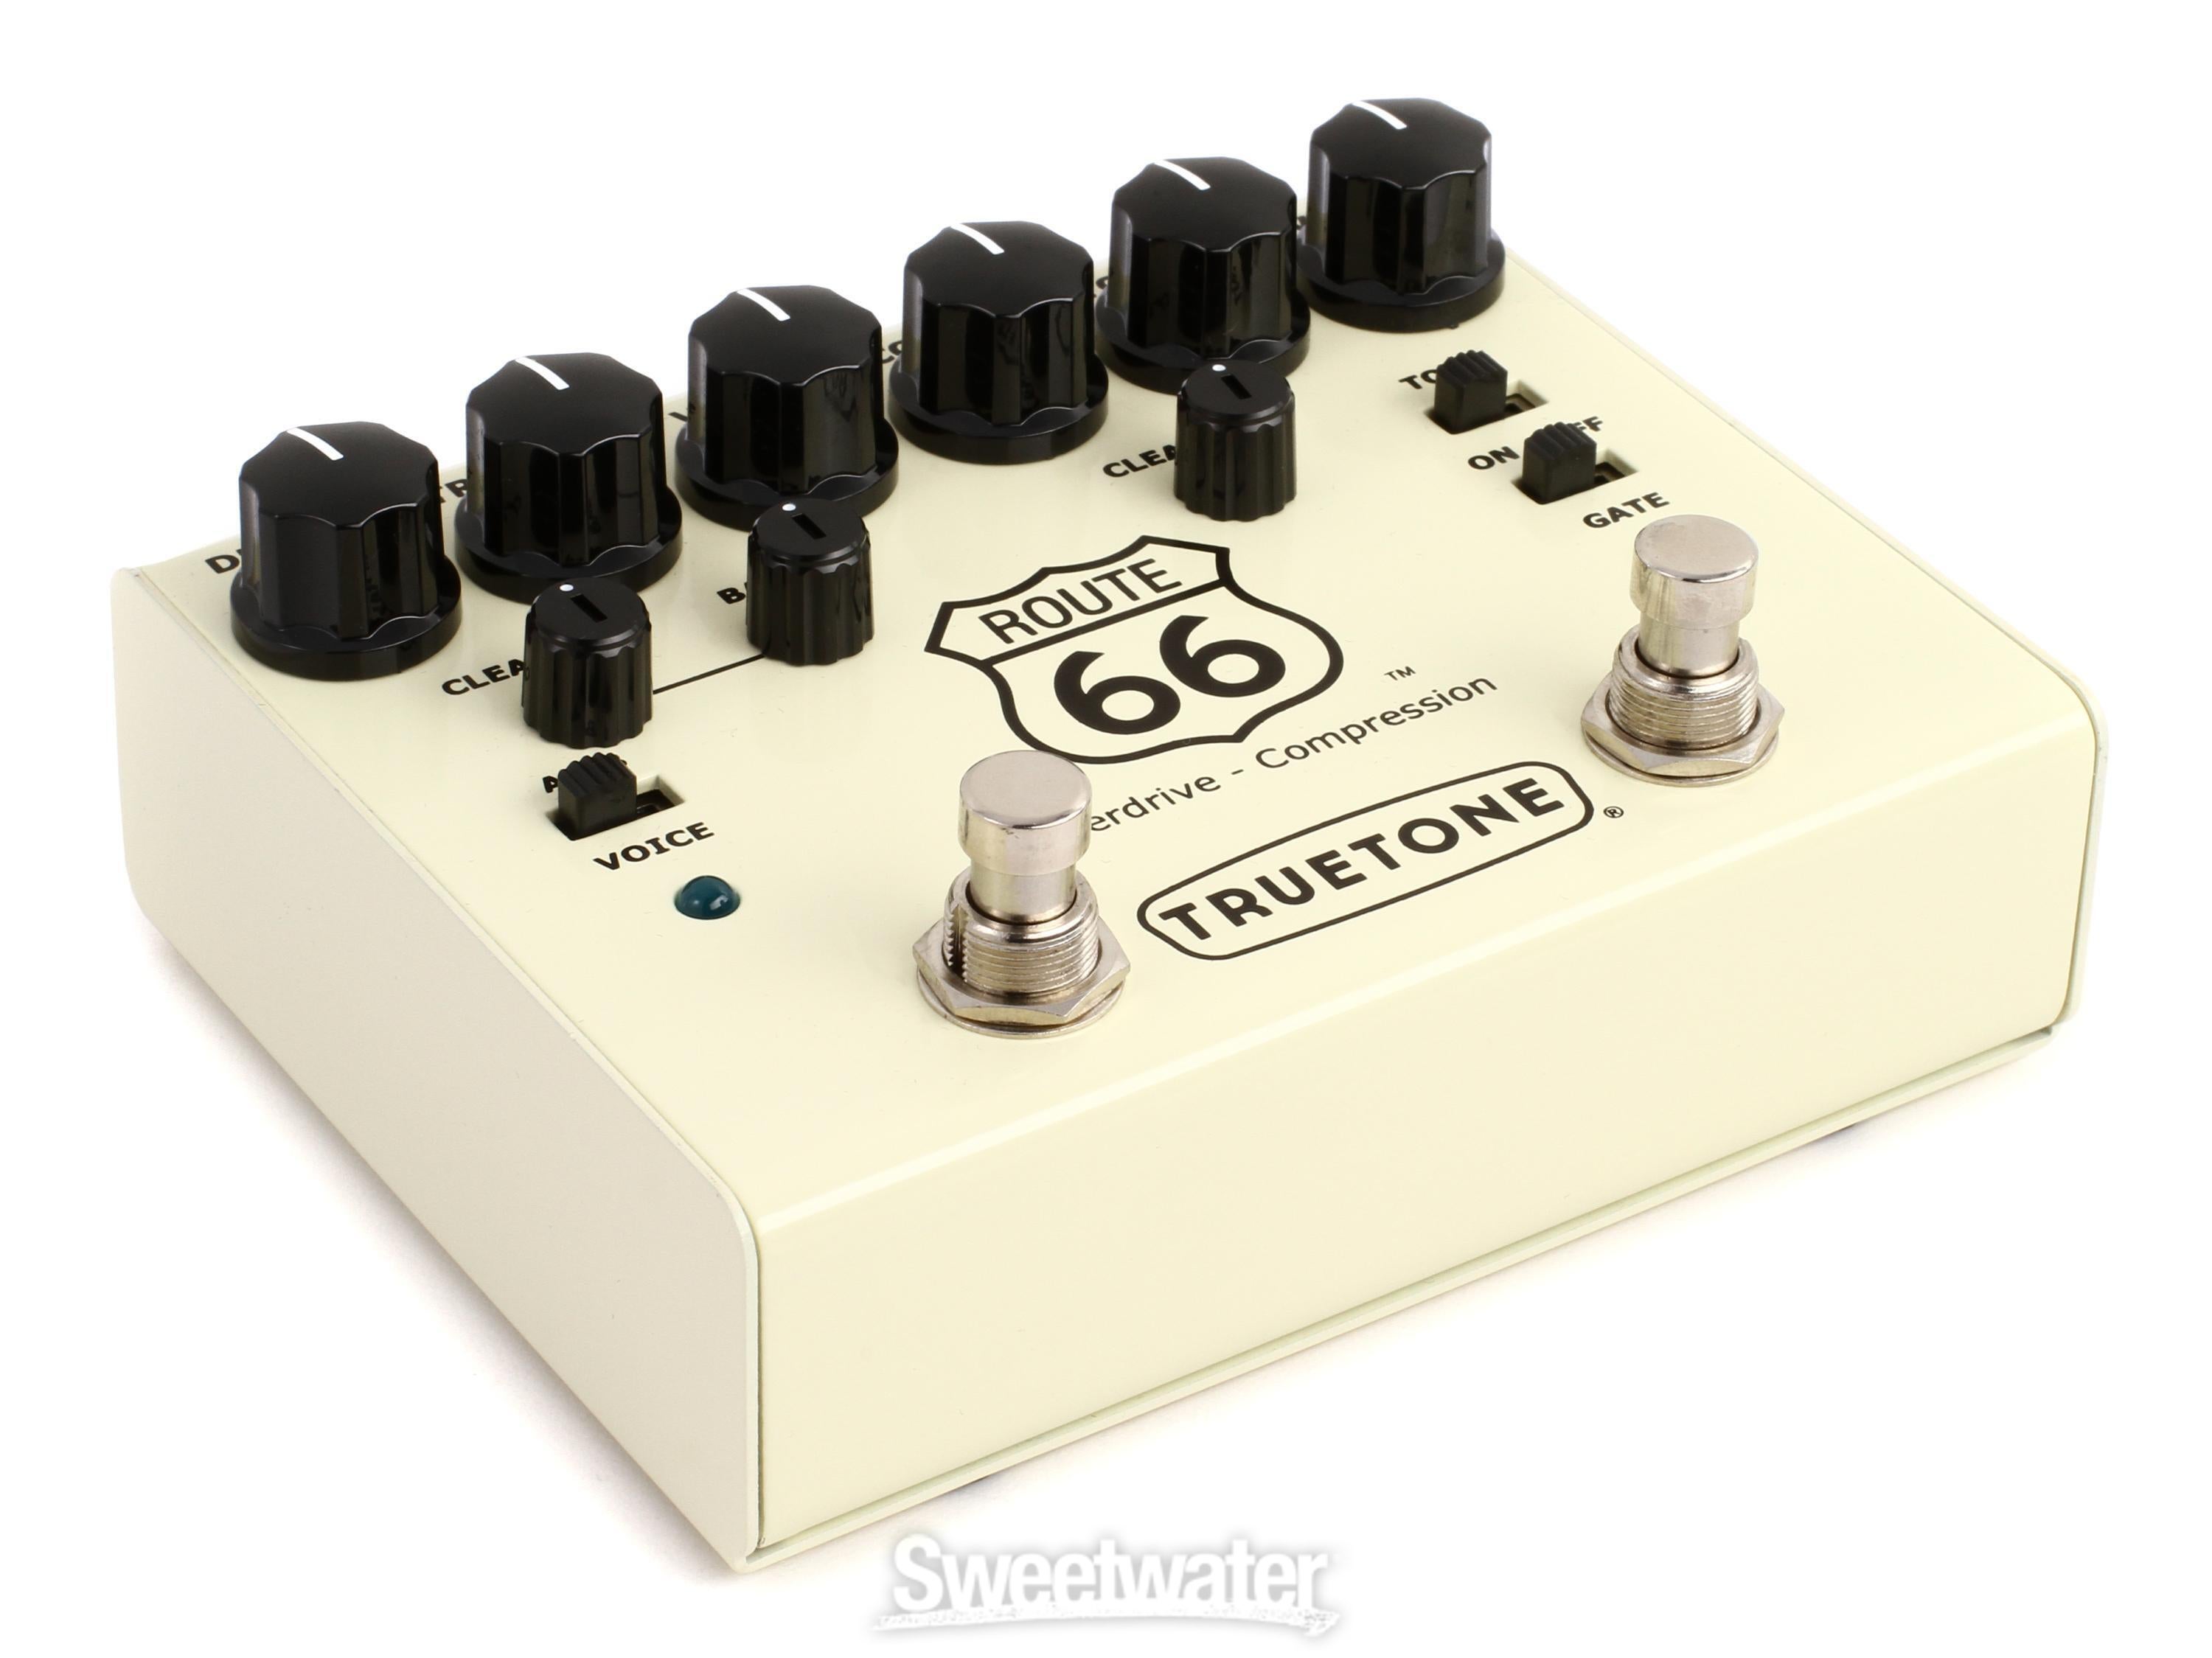 Truetone V3 Route 66 Overdrive / Compression Pedal | Sweetwater